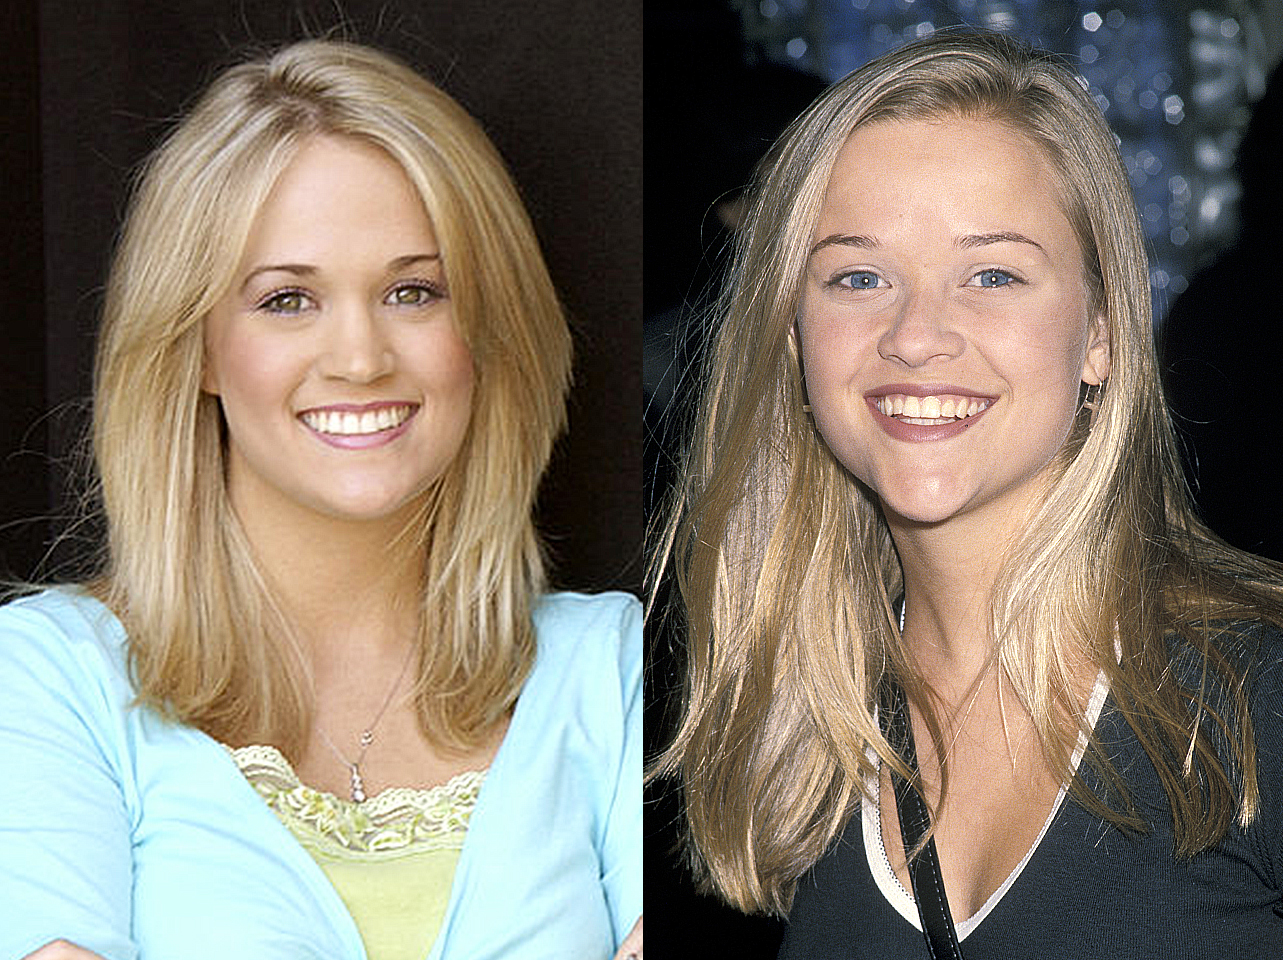 Reese Witherspoon and Carrie Underwood | Source: Getty Images